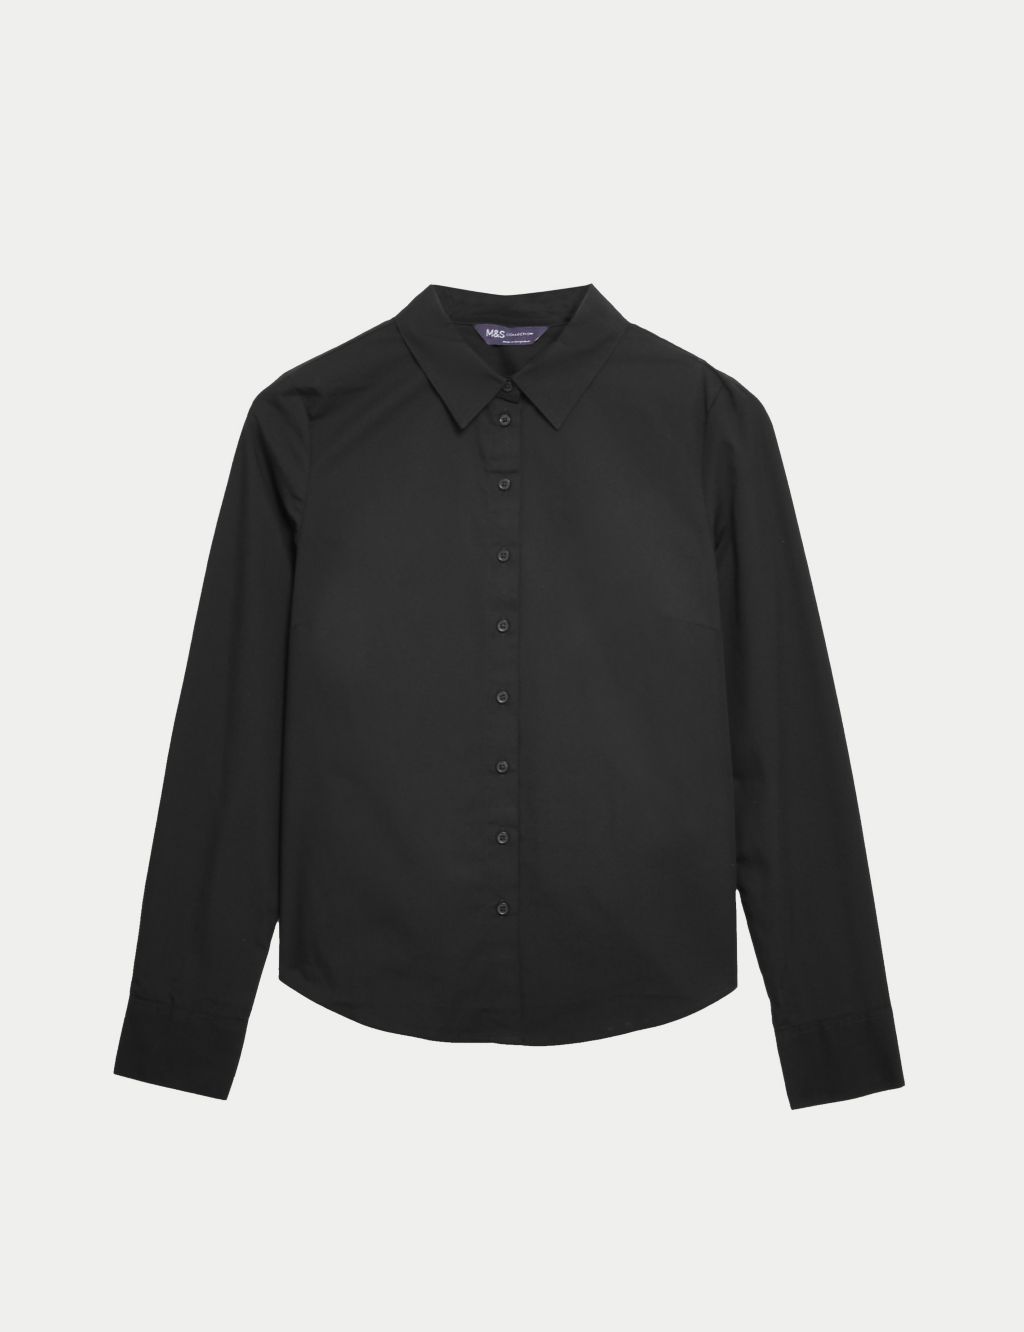 Cotton Rich Fitted Collared Shirt image 2